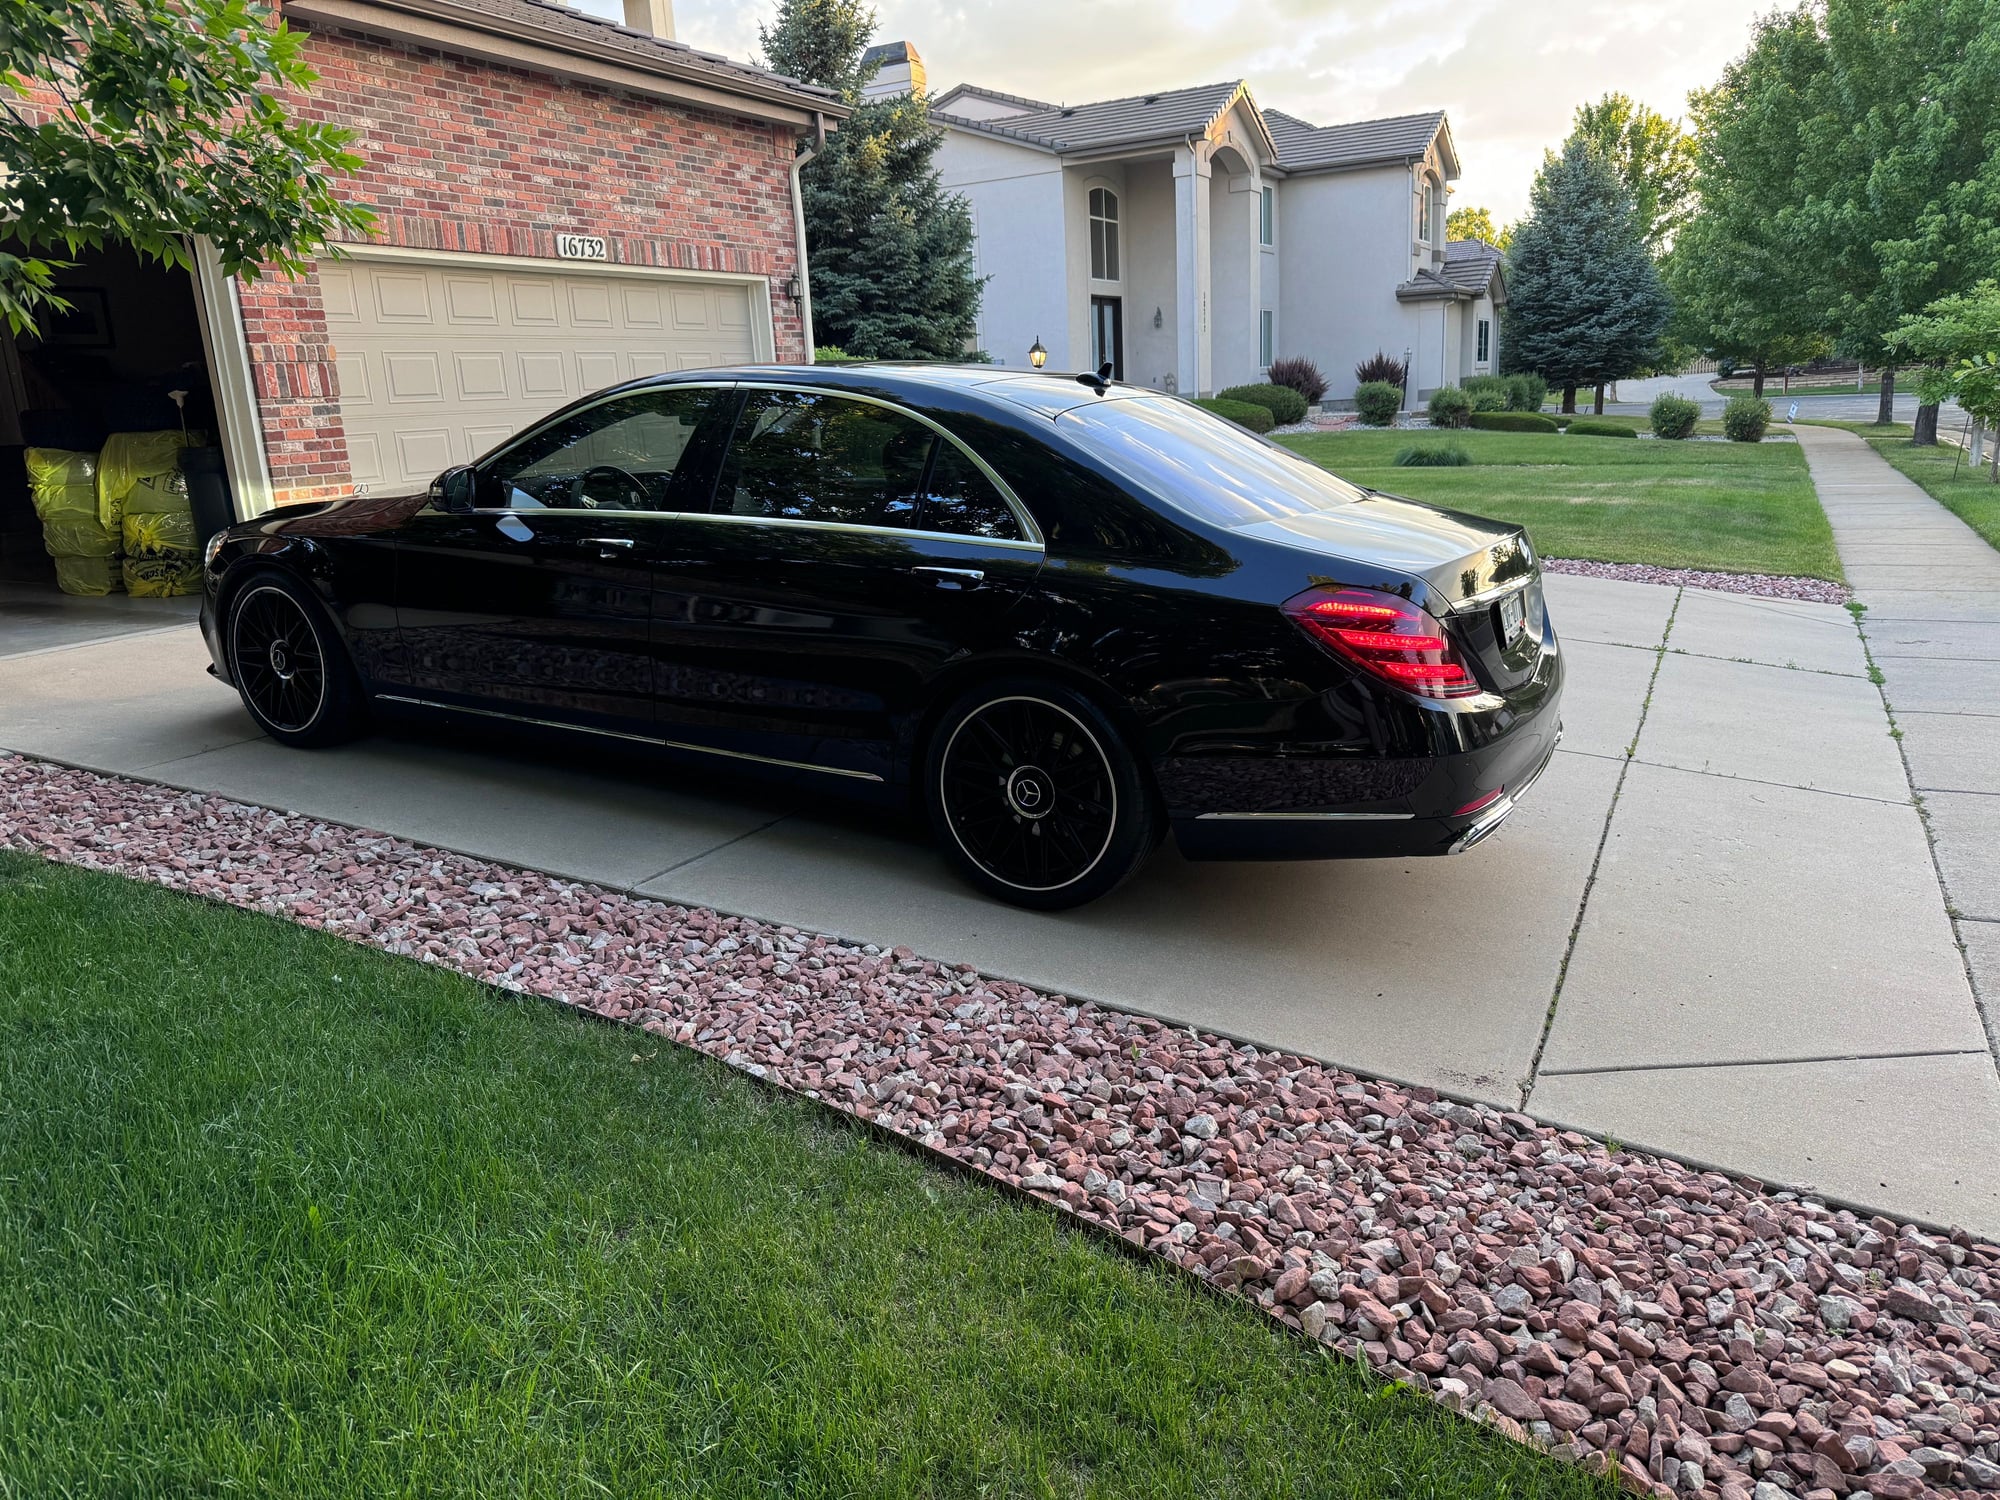 2019 Mercedes-Benz S560 - 2019 Mercedes S560 4Matic one of a kind in top condition - Used - VIN WDDUG8GB1KA430769 - 28,000 Miles - 8 cyl - AWD - Automatic - Sedan - Black - Centennial, CO 80016, United States